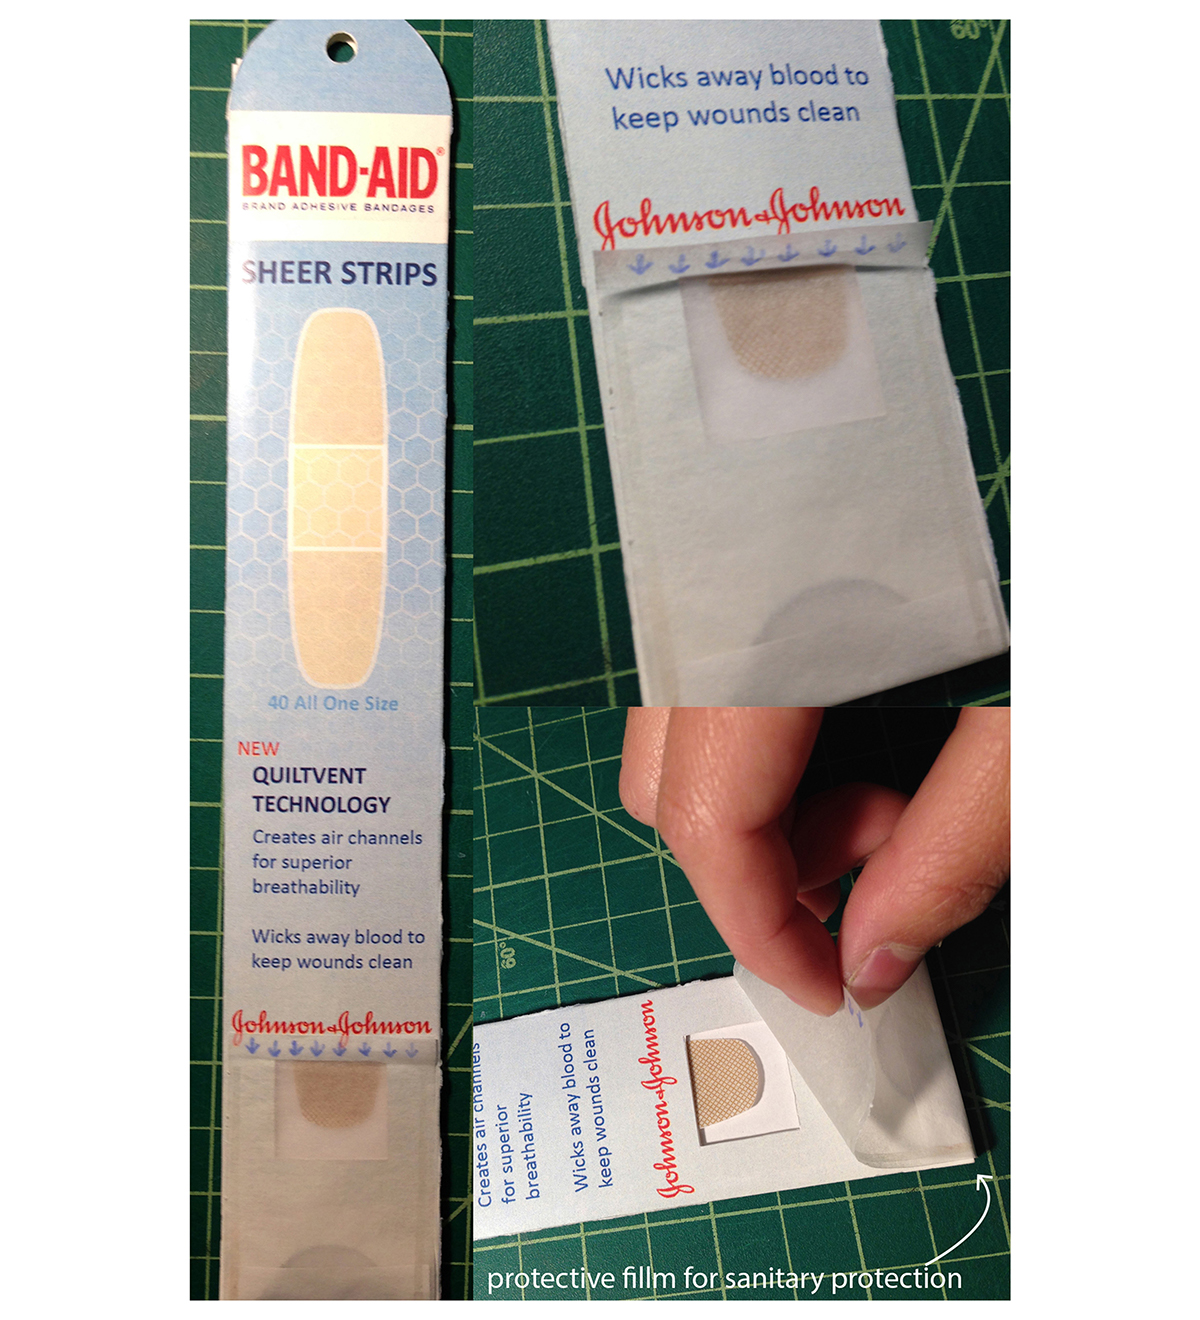 bandage dispenser package Band-Aid redesign